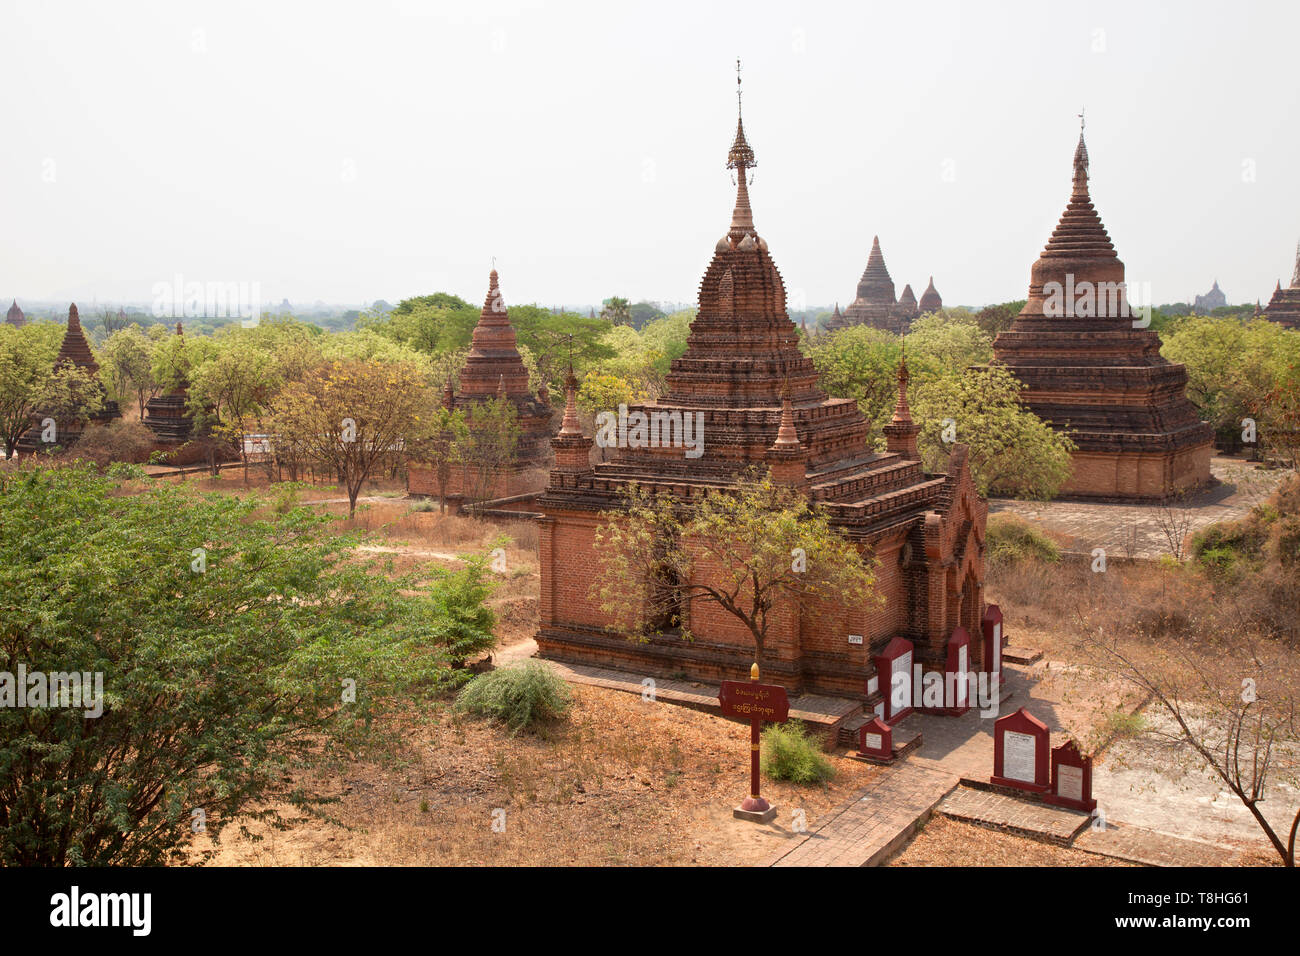 View of stupas and temples near Alotawpyae temple, Old Bagan and Nyaung U village area, Mandalay region, Myanmar, Asia Stock Photo